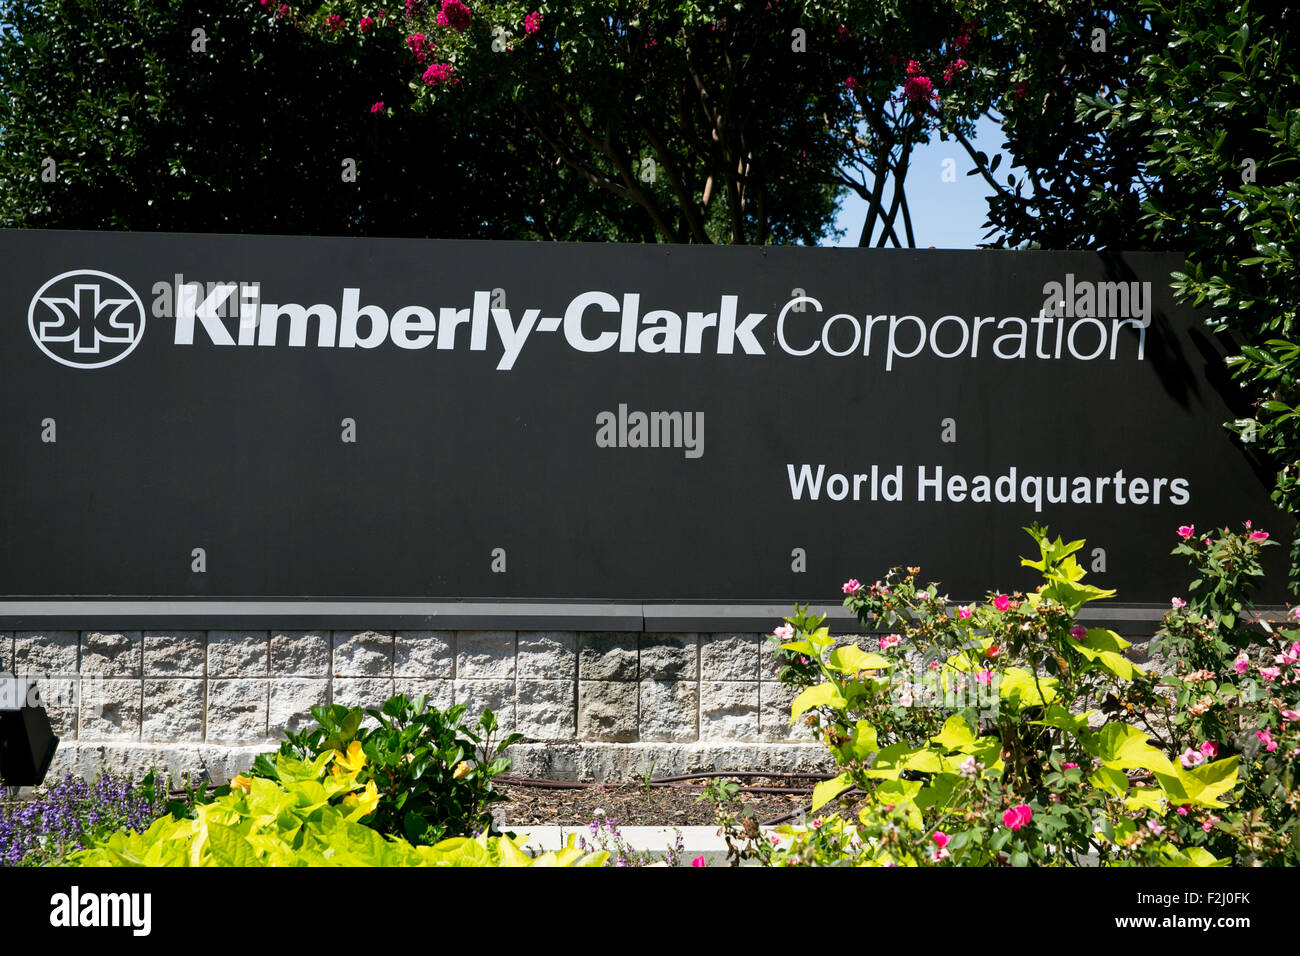 A logo sign outside of the headquarters of the Kimberly-Clark Corporation in Irving, Texas on September 13, 2015. Stock Photo